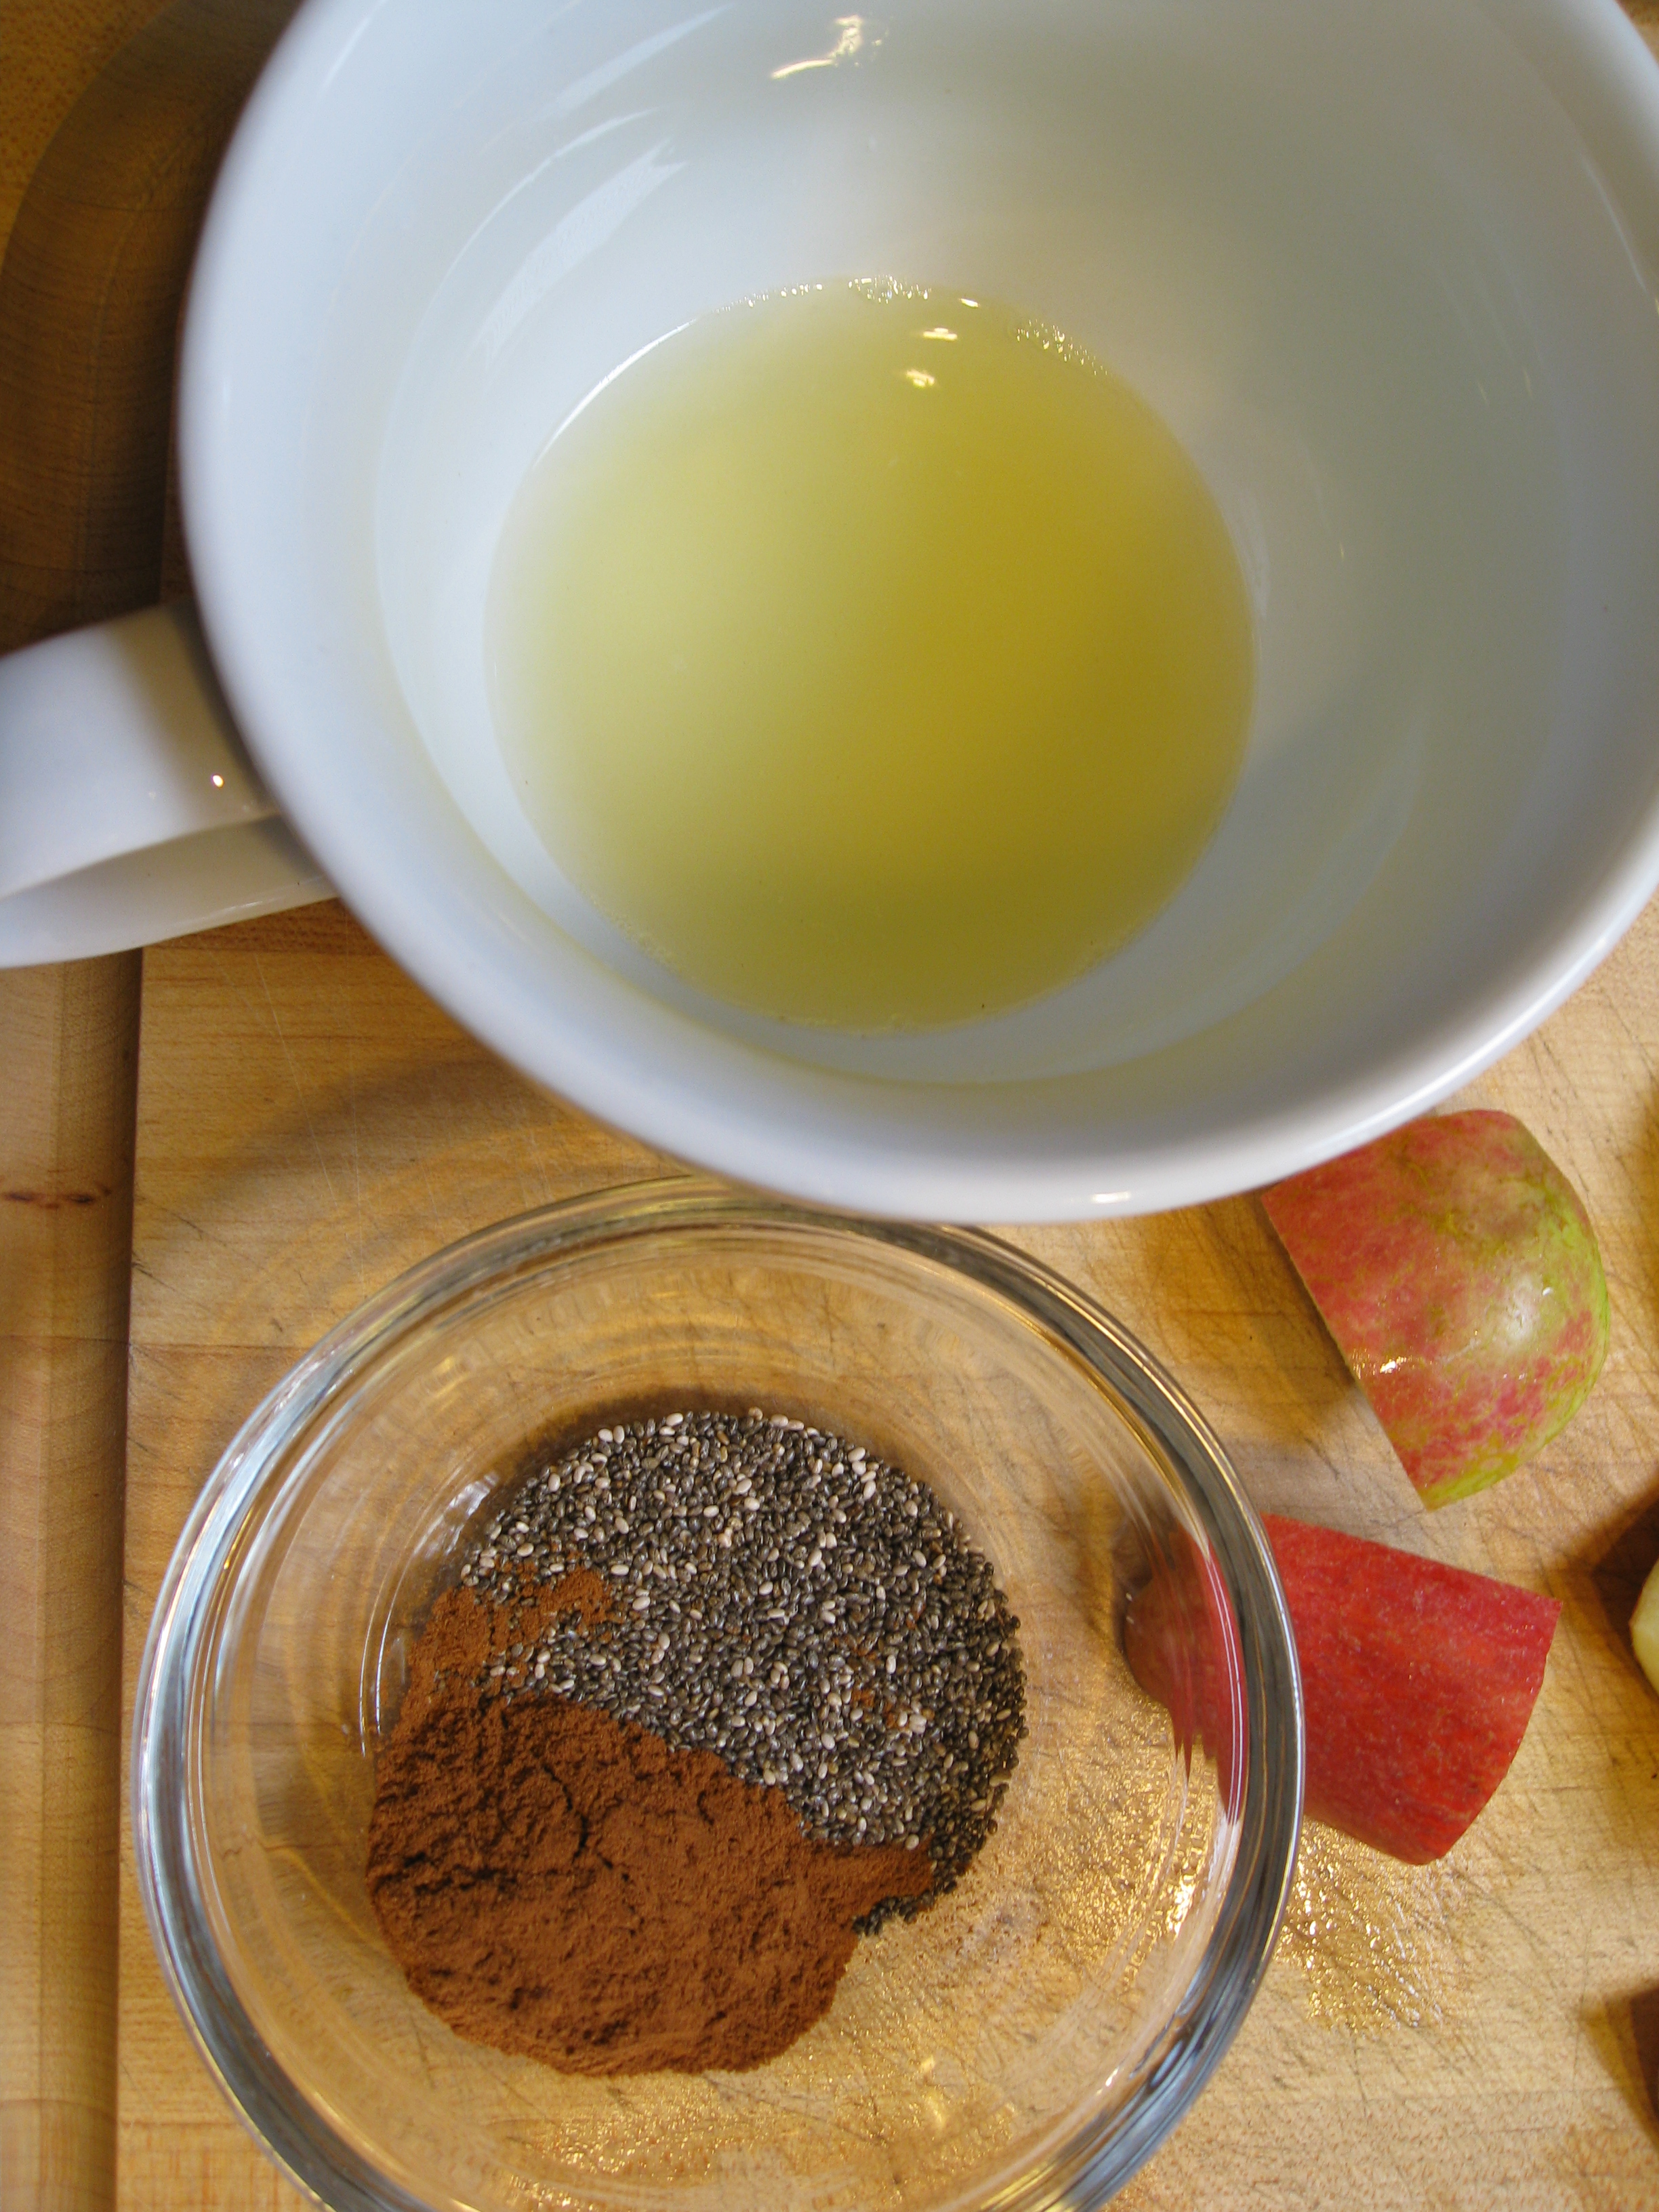 Chia seeds thicken the batch, cinnamon flavors it, and lemon juice keeps it from darkening.